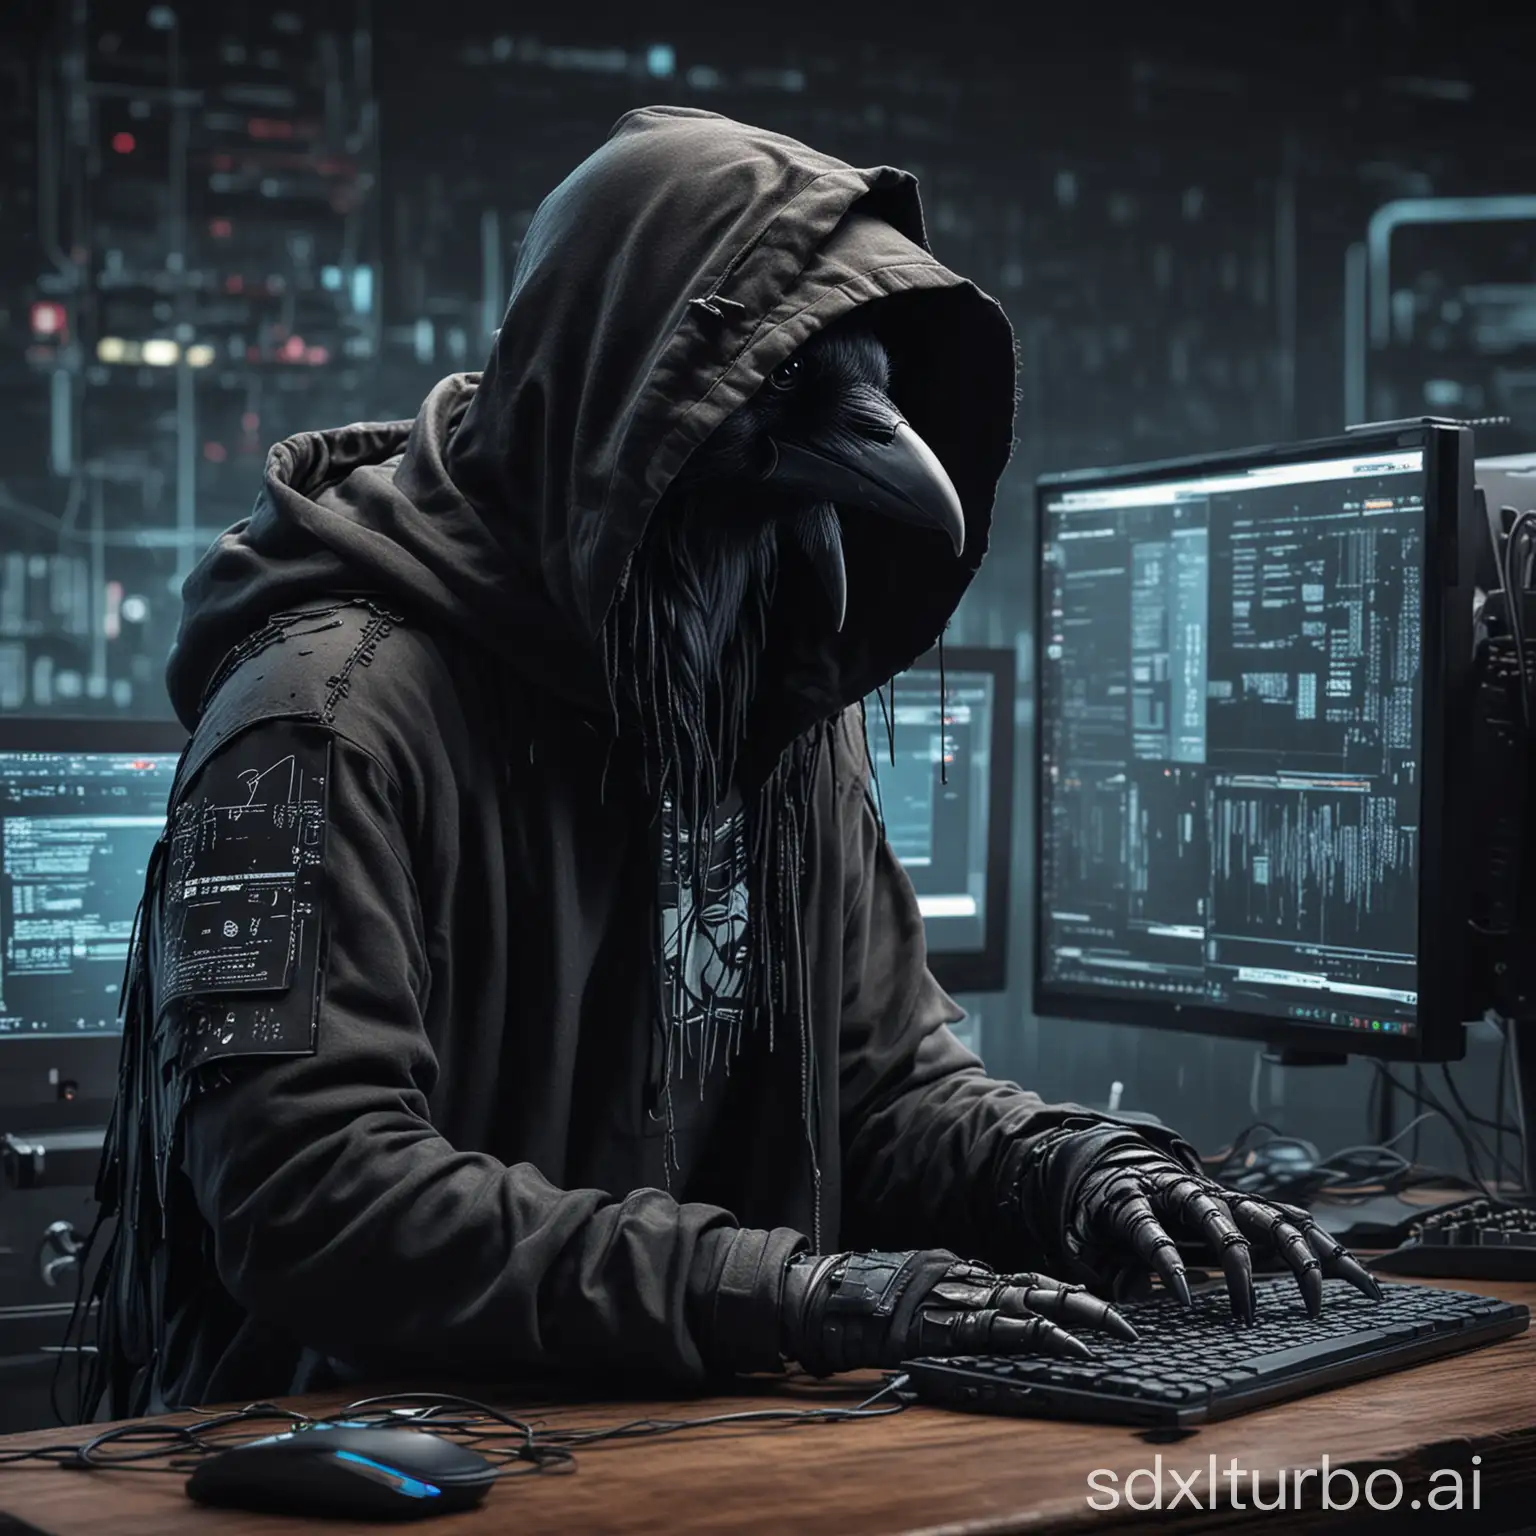 anthropomorphous cyberpunk crow with laptop wearing a hoodie making hacker things on the background many monitors, keyboards al computers as a real hacker